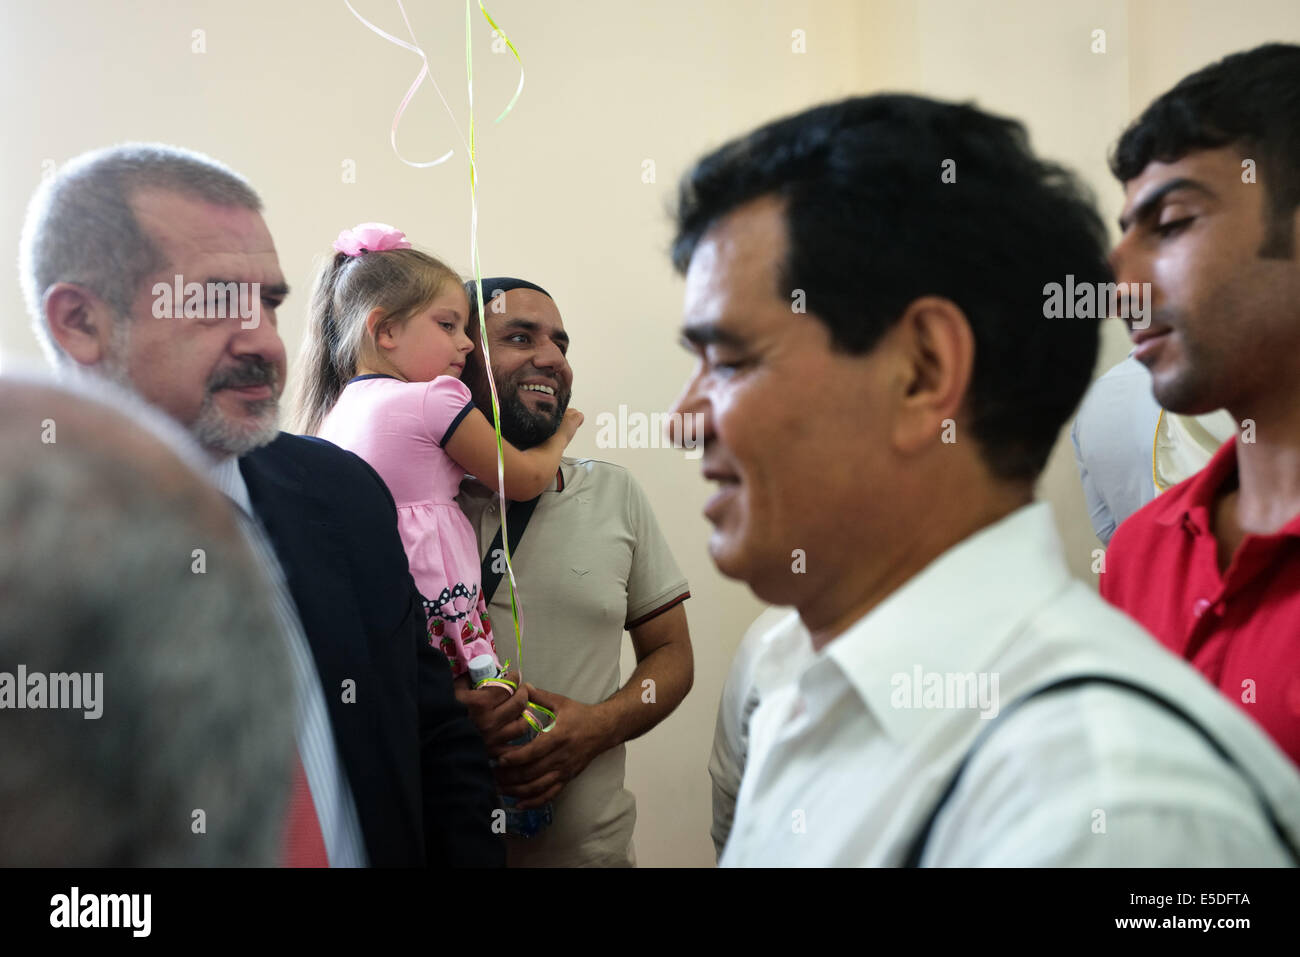 Kiev, Ukraine. 28th July, 2014. Eid-al-Fitr in Kiev. Eid-al-Fitr is feast, that marks the end of Holy month Ramadan. This year refugees from Crimea and Syria celebrate Eid-al-Fitr in Kiev. Mustafa Dzhemilev, ex-chairman of Crimean Mejlis and persona non-grata in Crimea, also visited mosque. Credit:  Oleksandr Rupeta/Alamy Live News Stock Photo